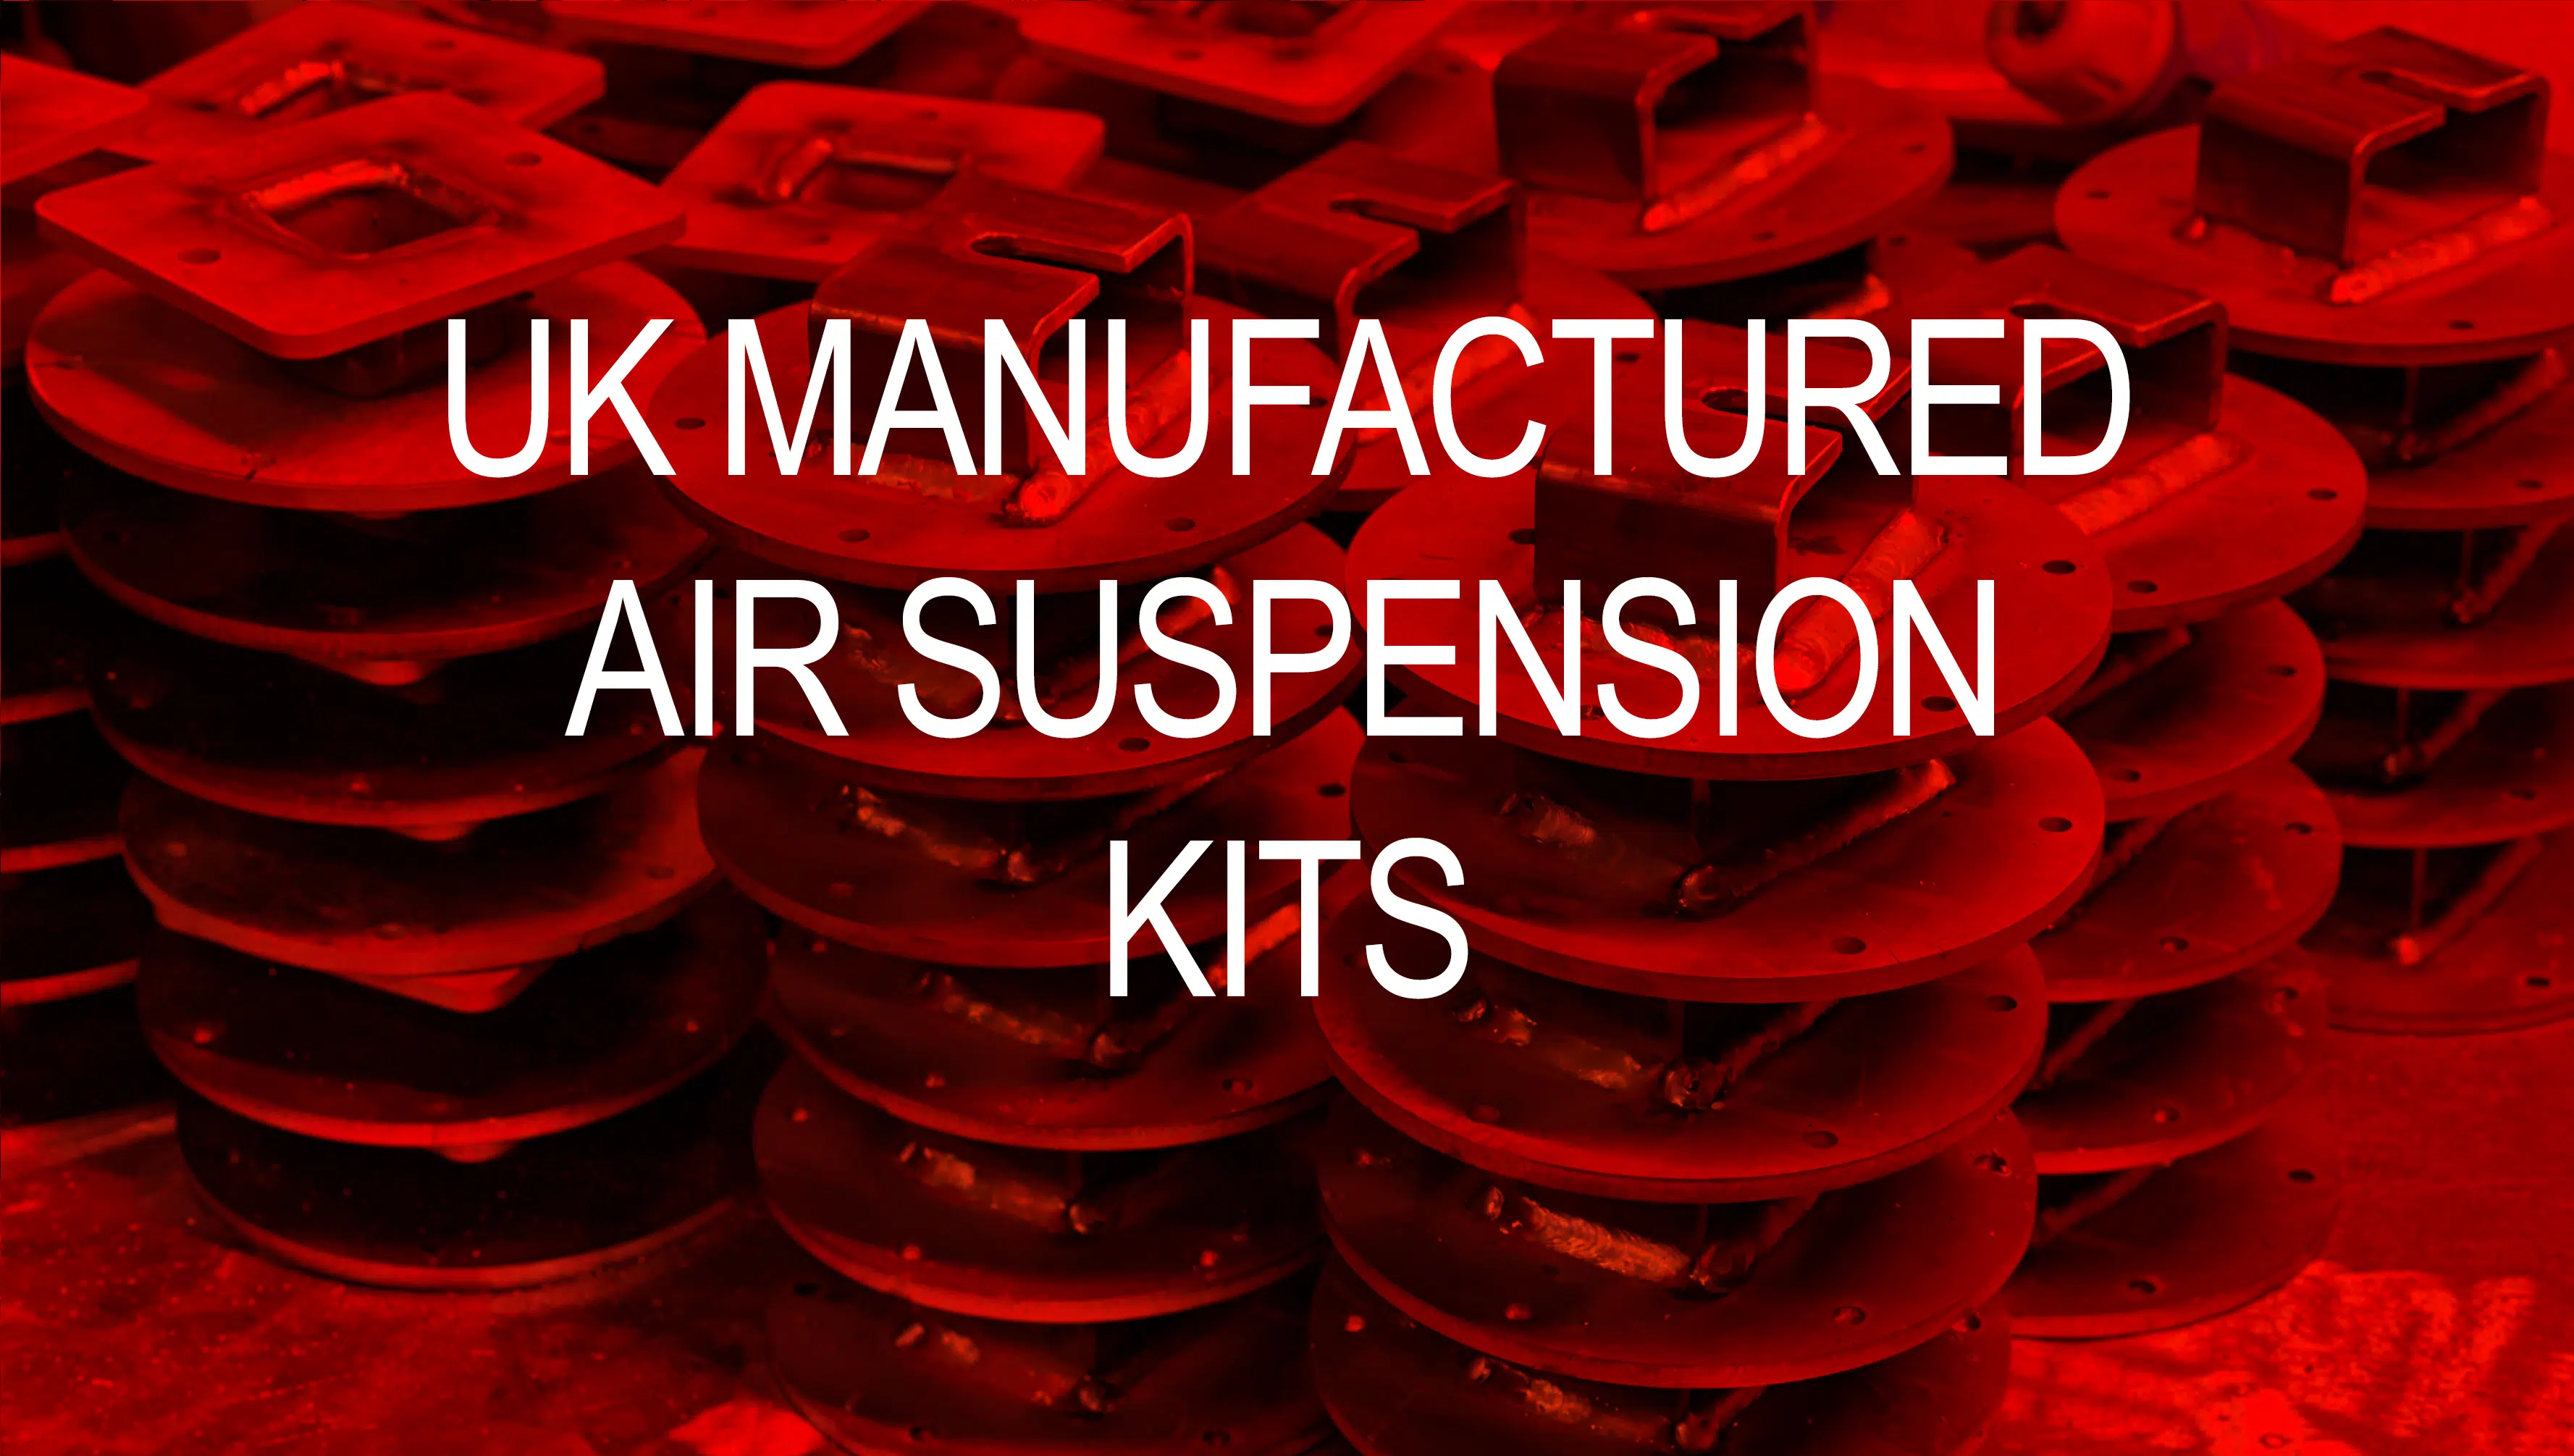 Red Image showing air suspension brackets in a neat pile being manufactured